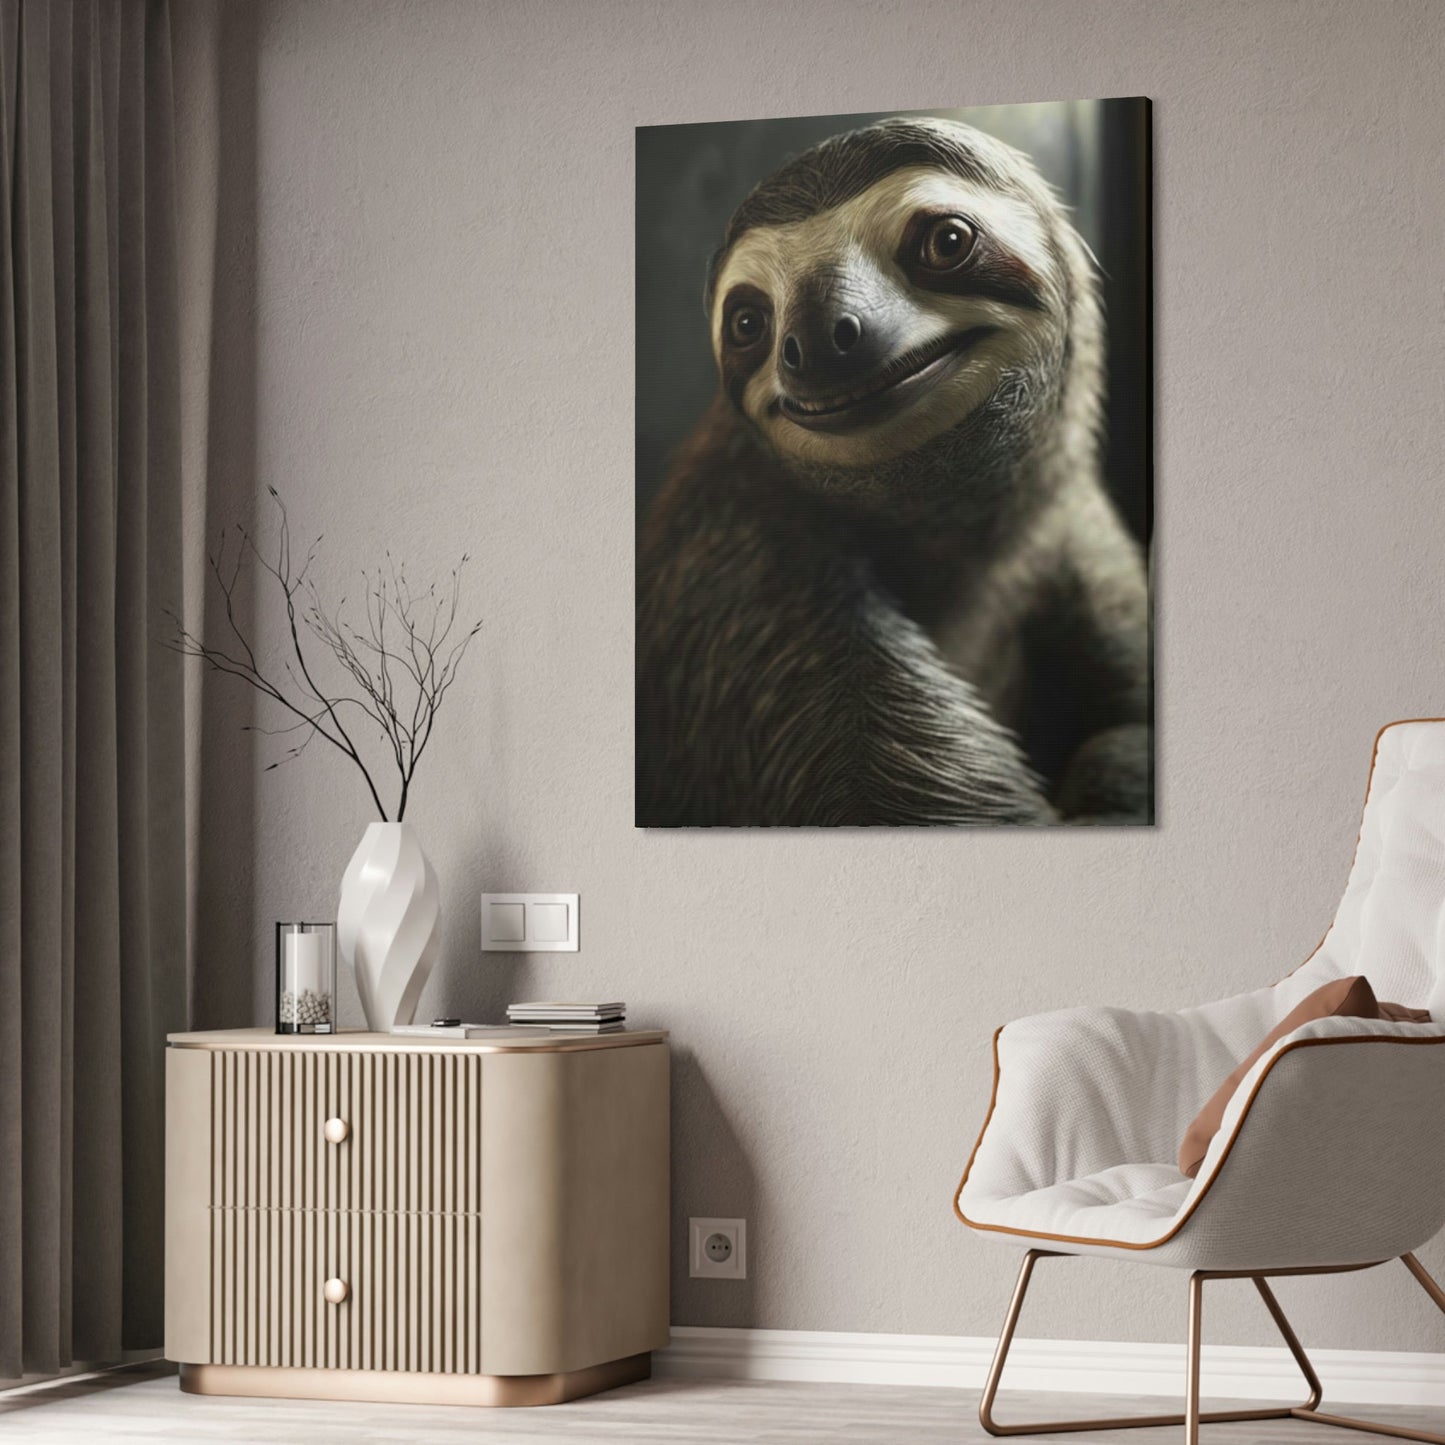 Slow and Steady: A Slothful Journey